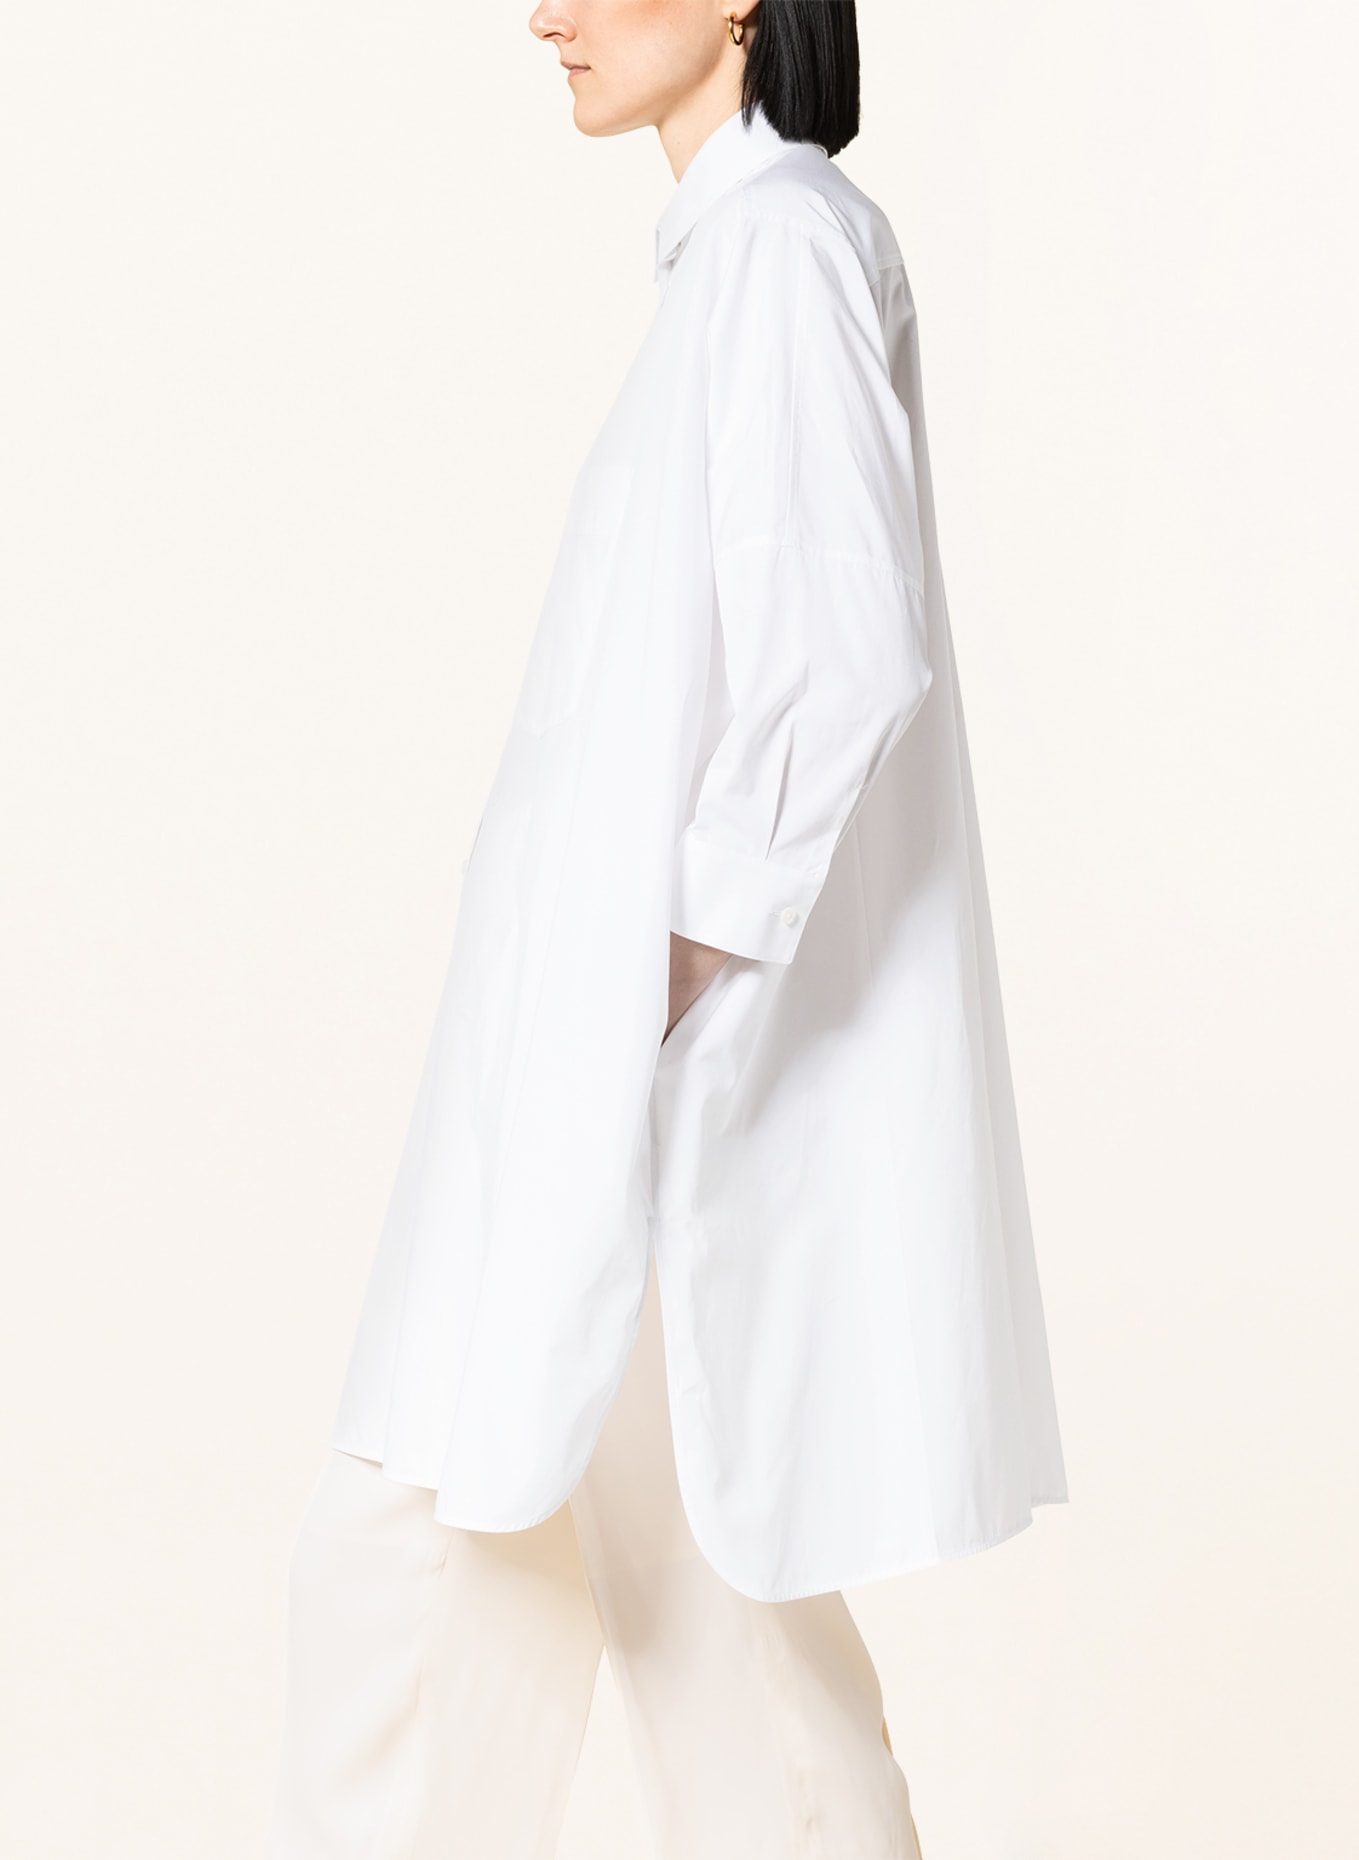 JIL SANDER Oversized shirt blouse with 3/4 sleeves, Color: WHITE (Image 5)